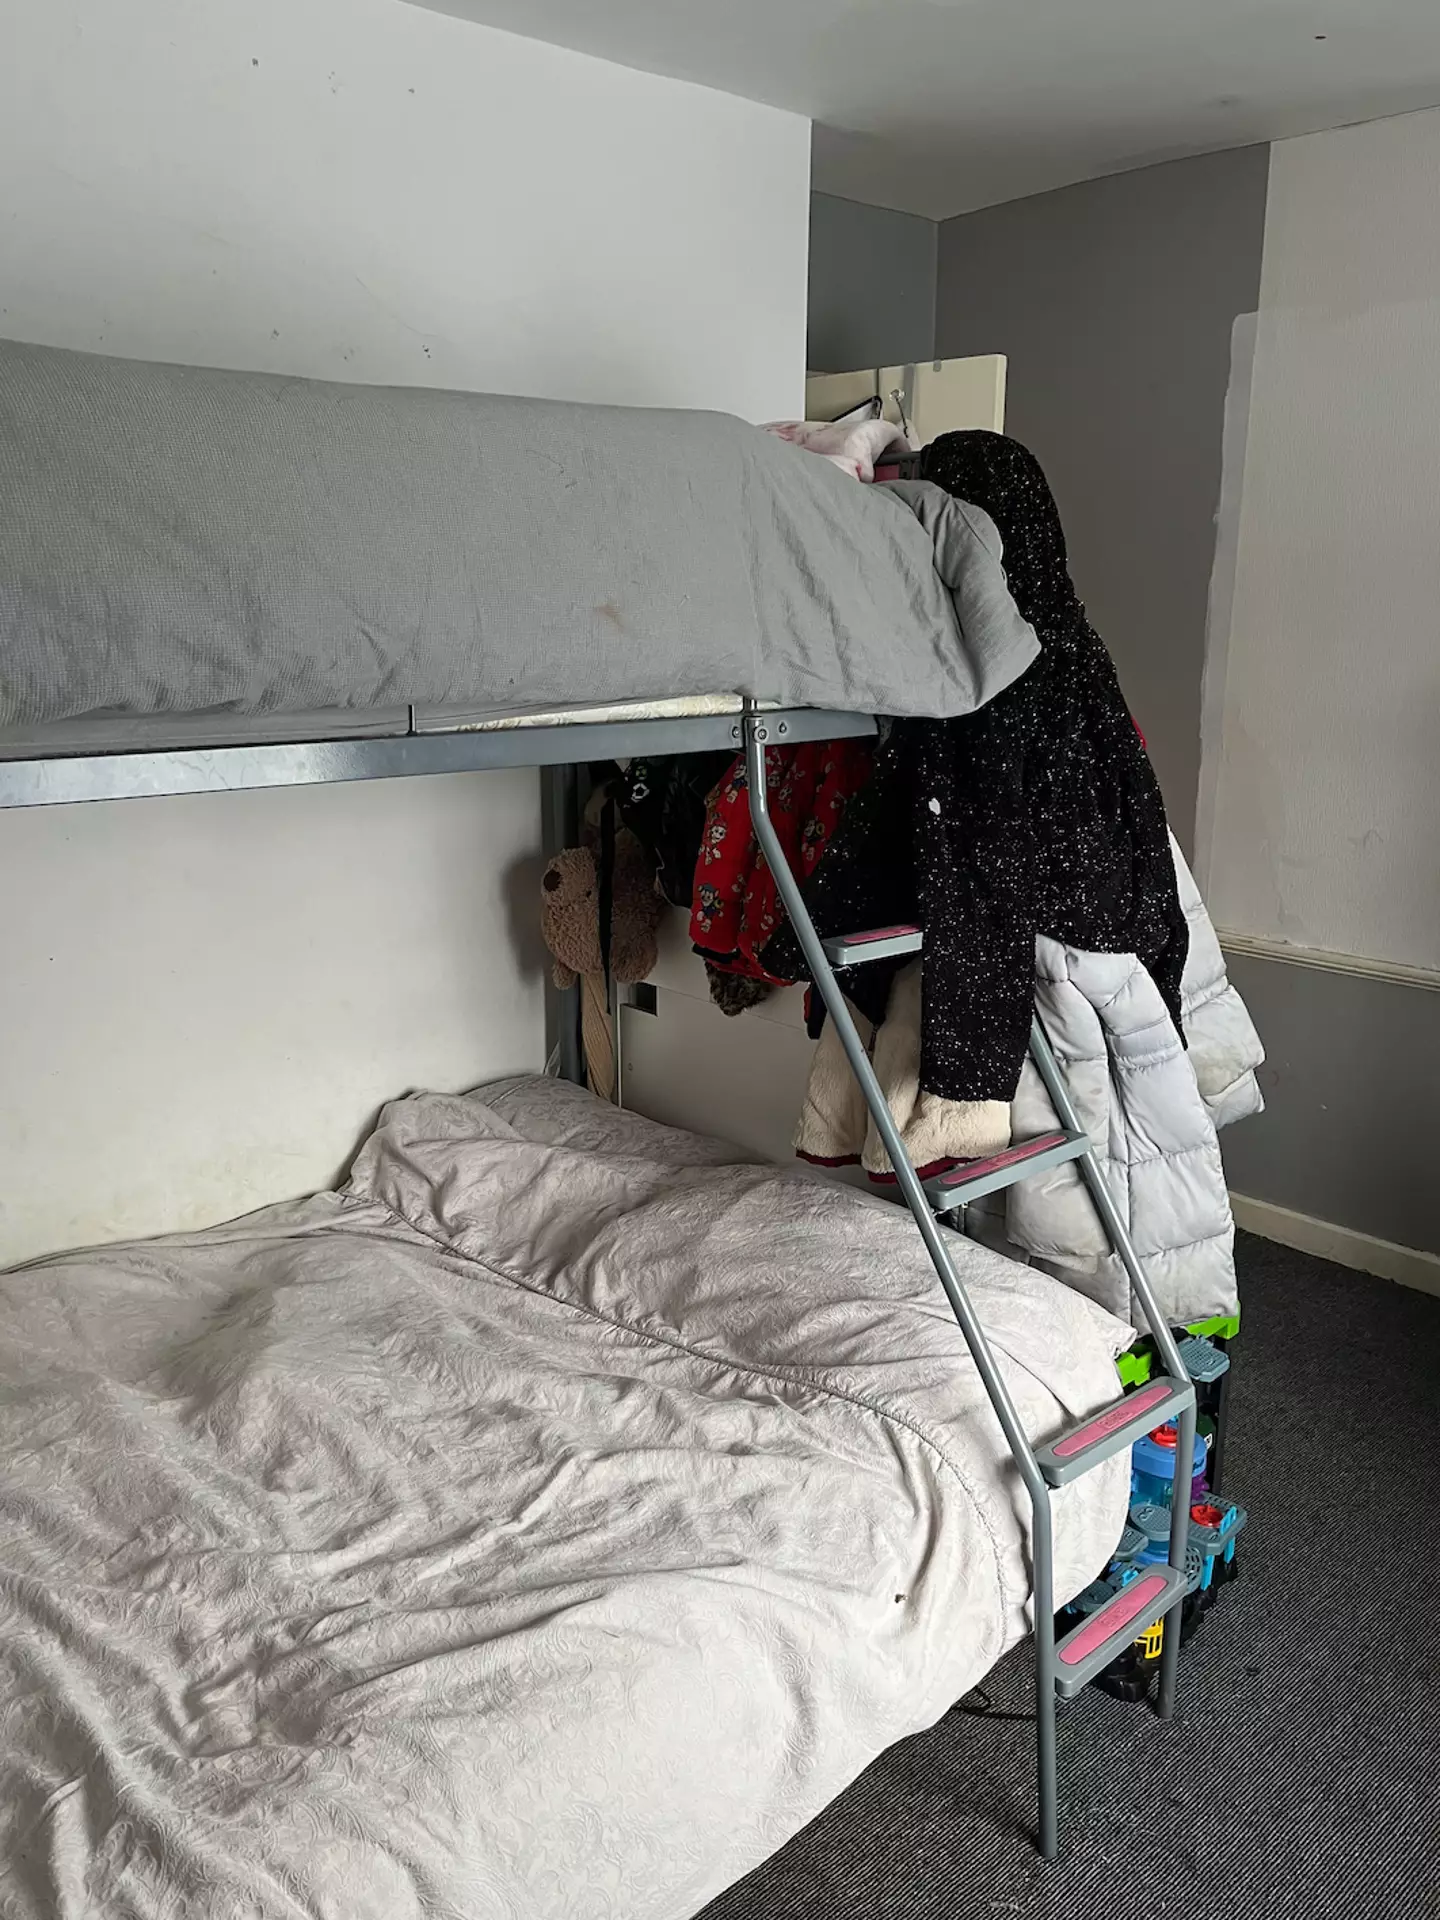 There are two bunk beds, two single beds and a double bed.